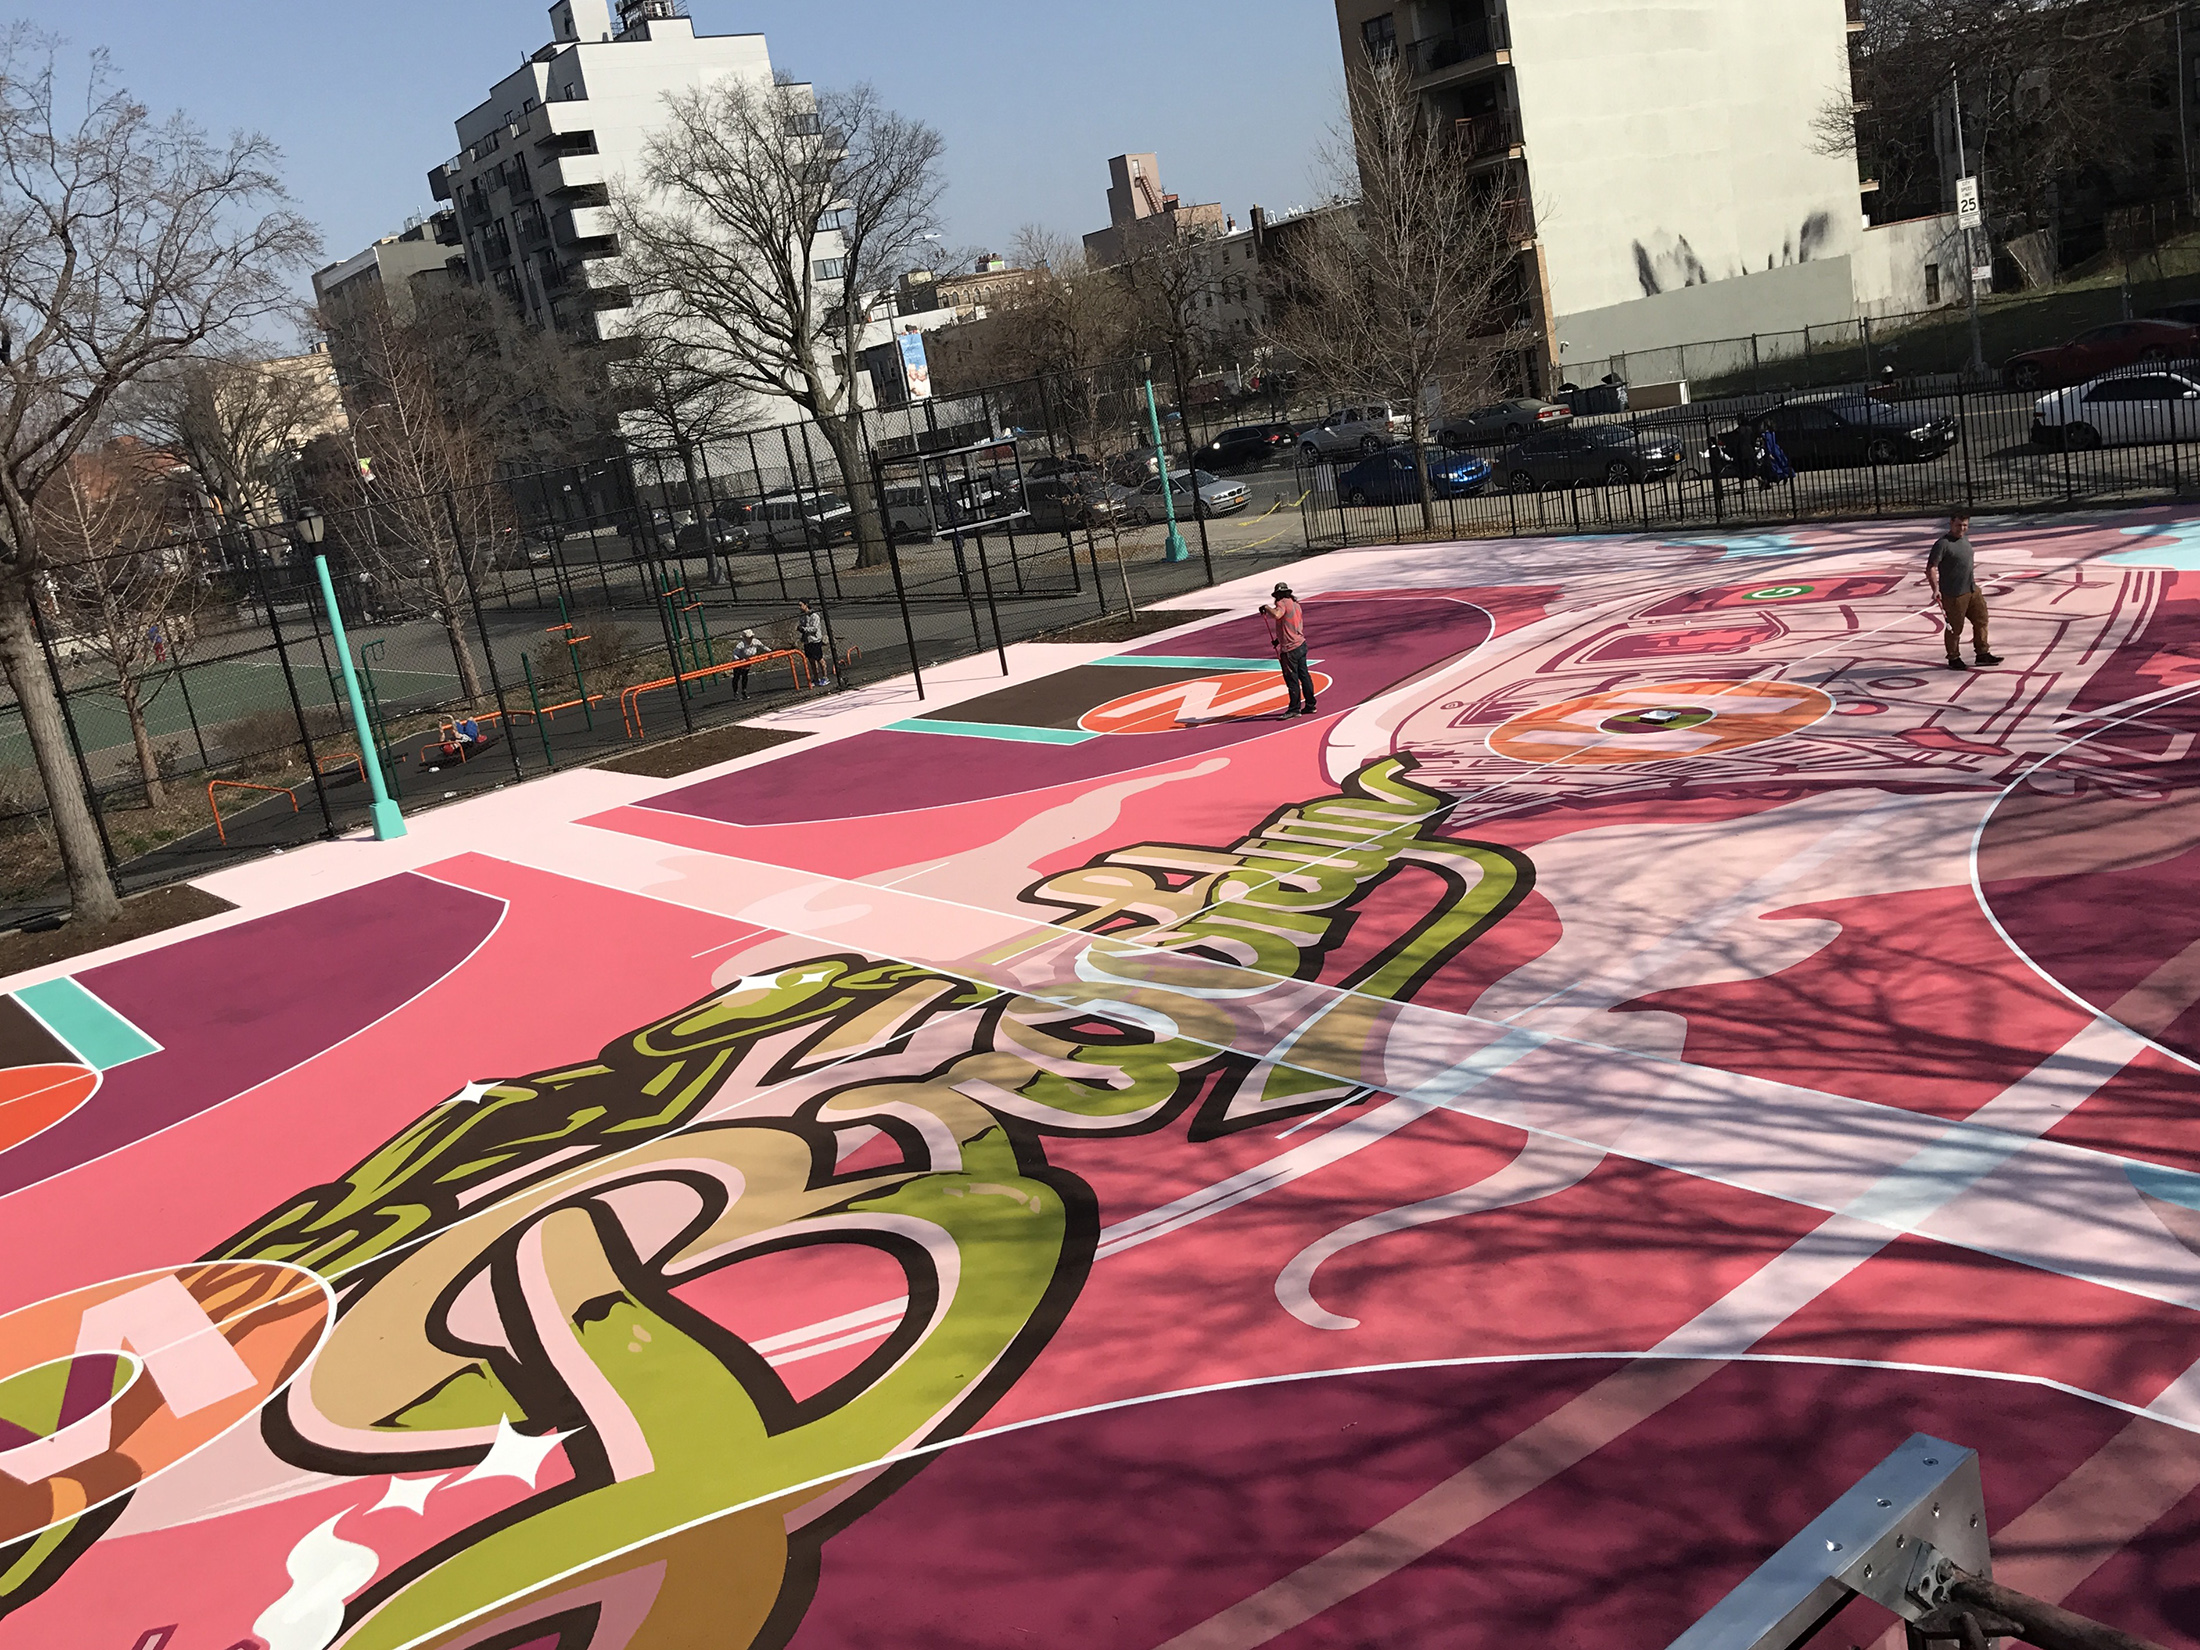 Askew, basketball court mural, Tracy Morgan, The Last OG, Brooklyn, G Train, Masterpiece NYC, masterpiece murals, hand painted mural, office mural, custom mural, mural, graffiti mural, graffiti artist for hire, graffiti mural, graffiti artist